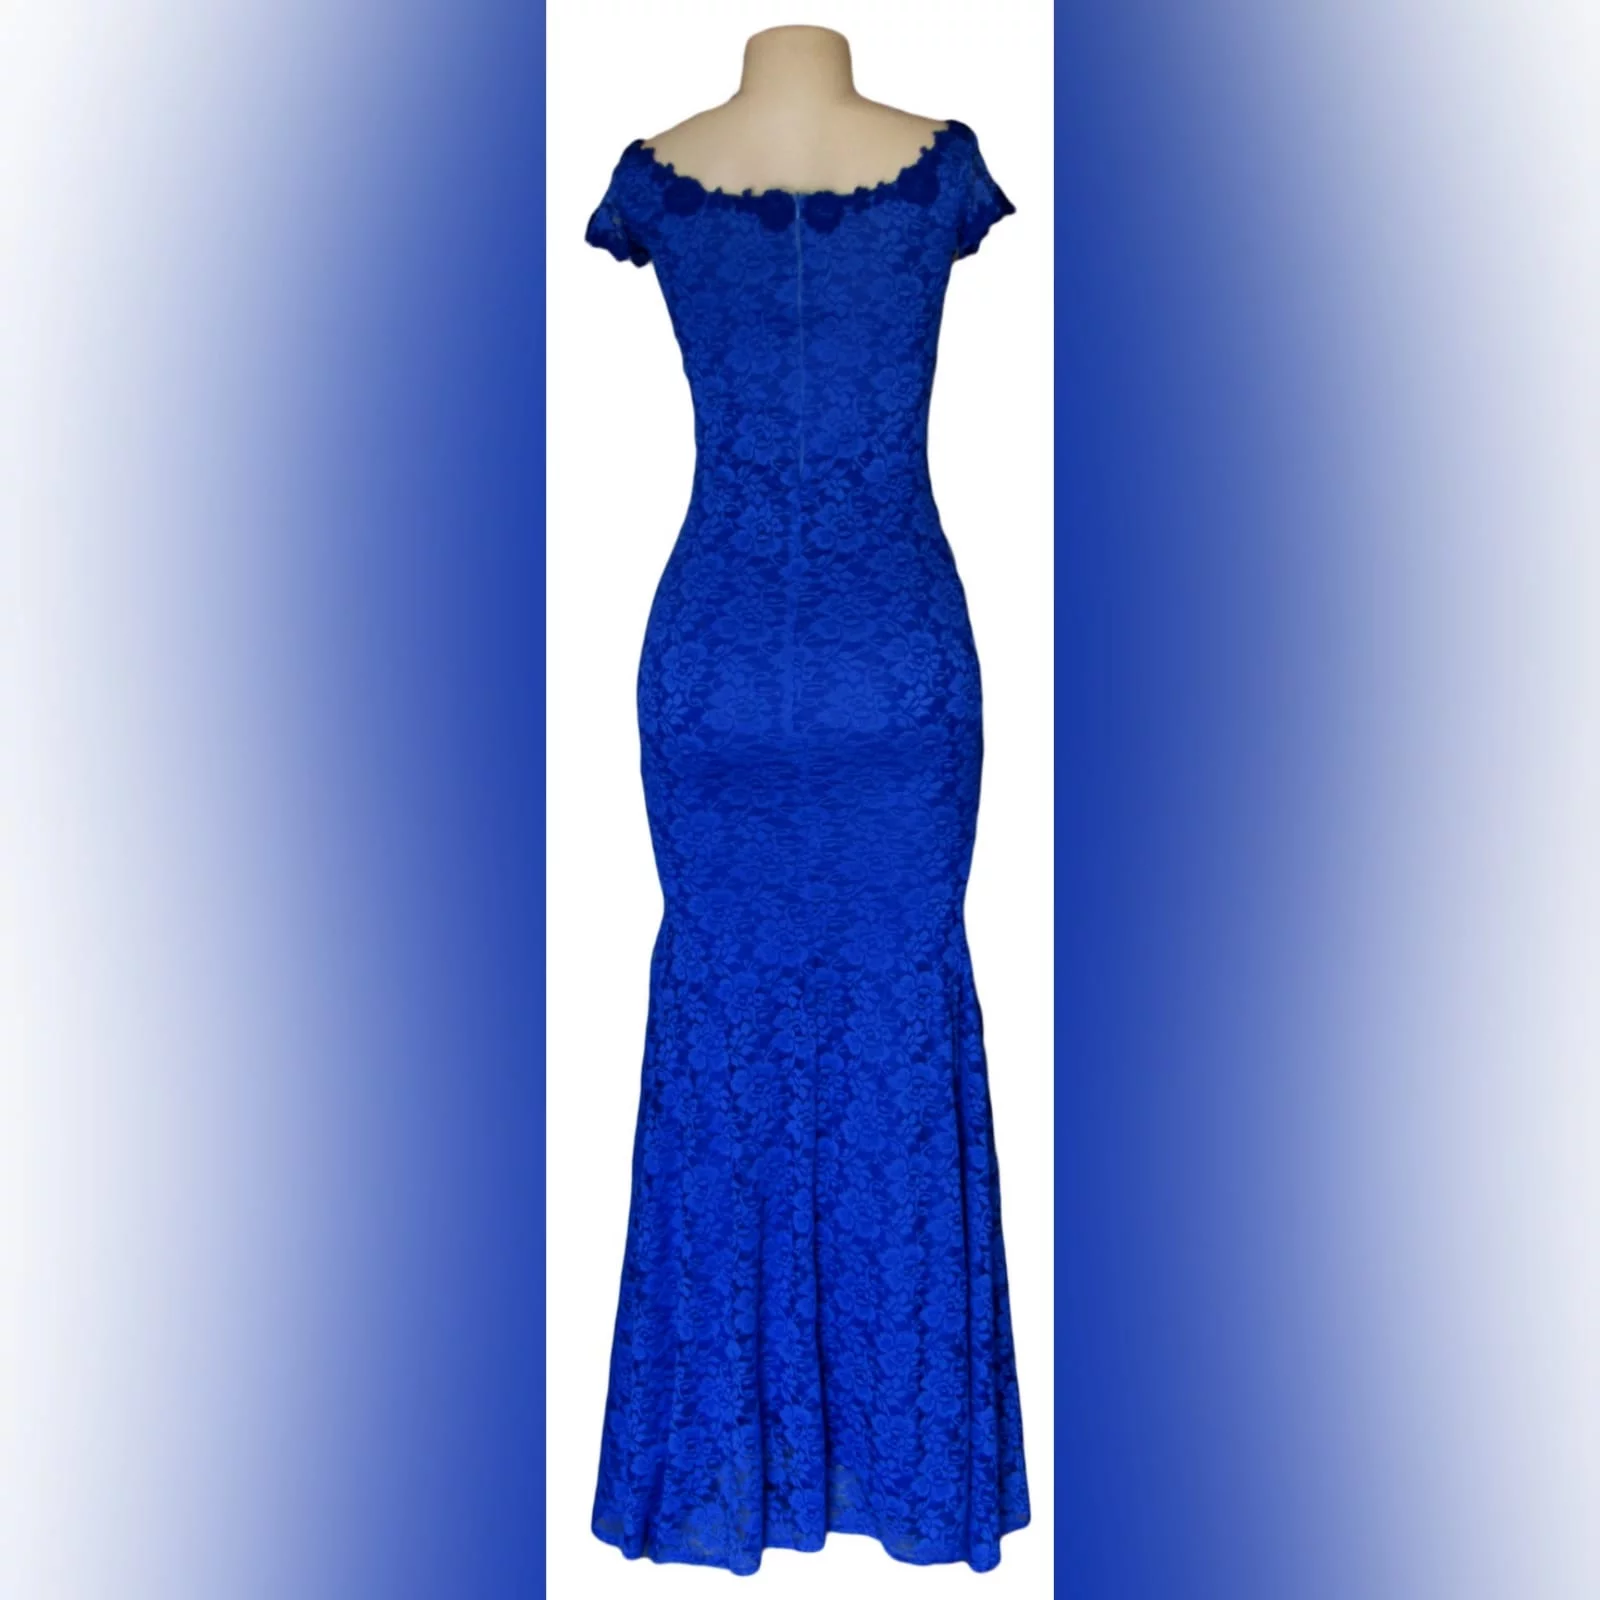 Royal blue fully lace prom dress 7 royal blue fully lace prom dress. An elegant simple design fitted till the hip with a slight flare. An off-shoulder neckline and cap sleeves detailed with guipure lace.